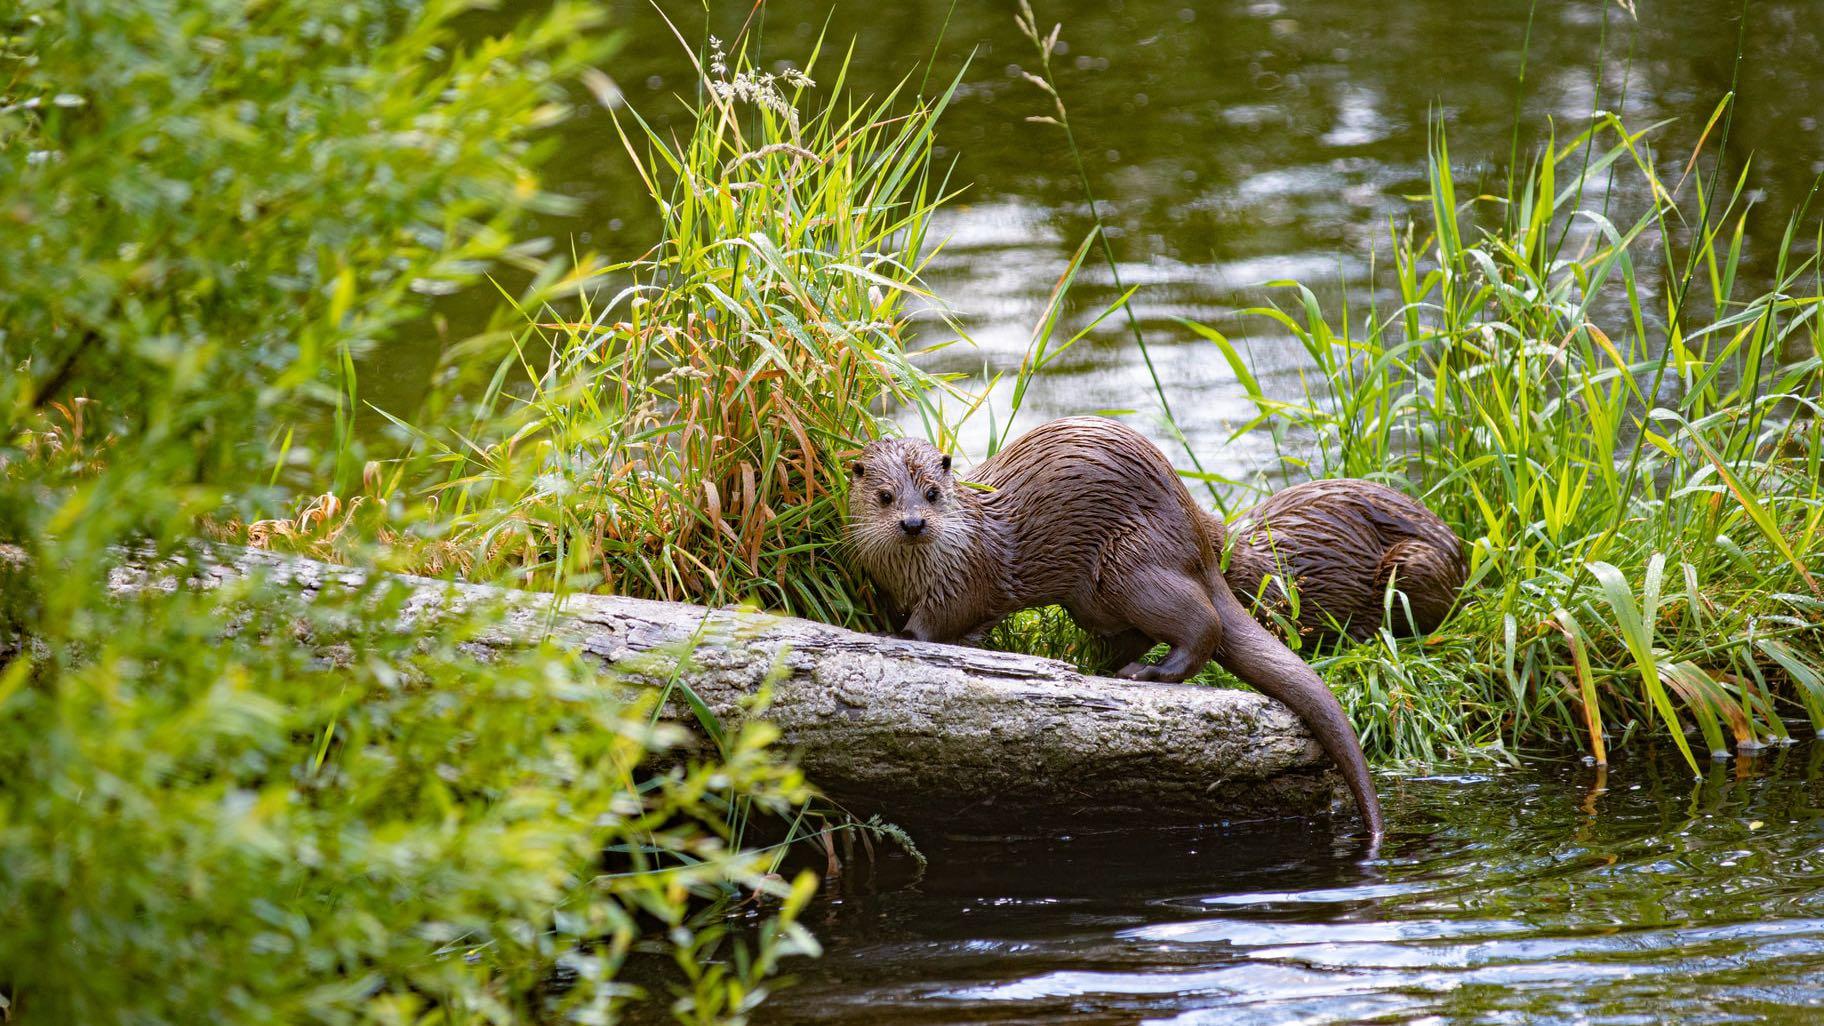 Otters are often confused with beavers and muskrats. Otters are the far superior swimmers, built for speed. Their small ears don't protrude, so as to decrease drag in the water. (Andreas Schantl / Unsplash)